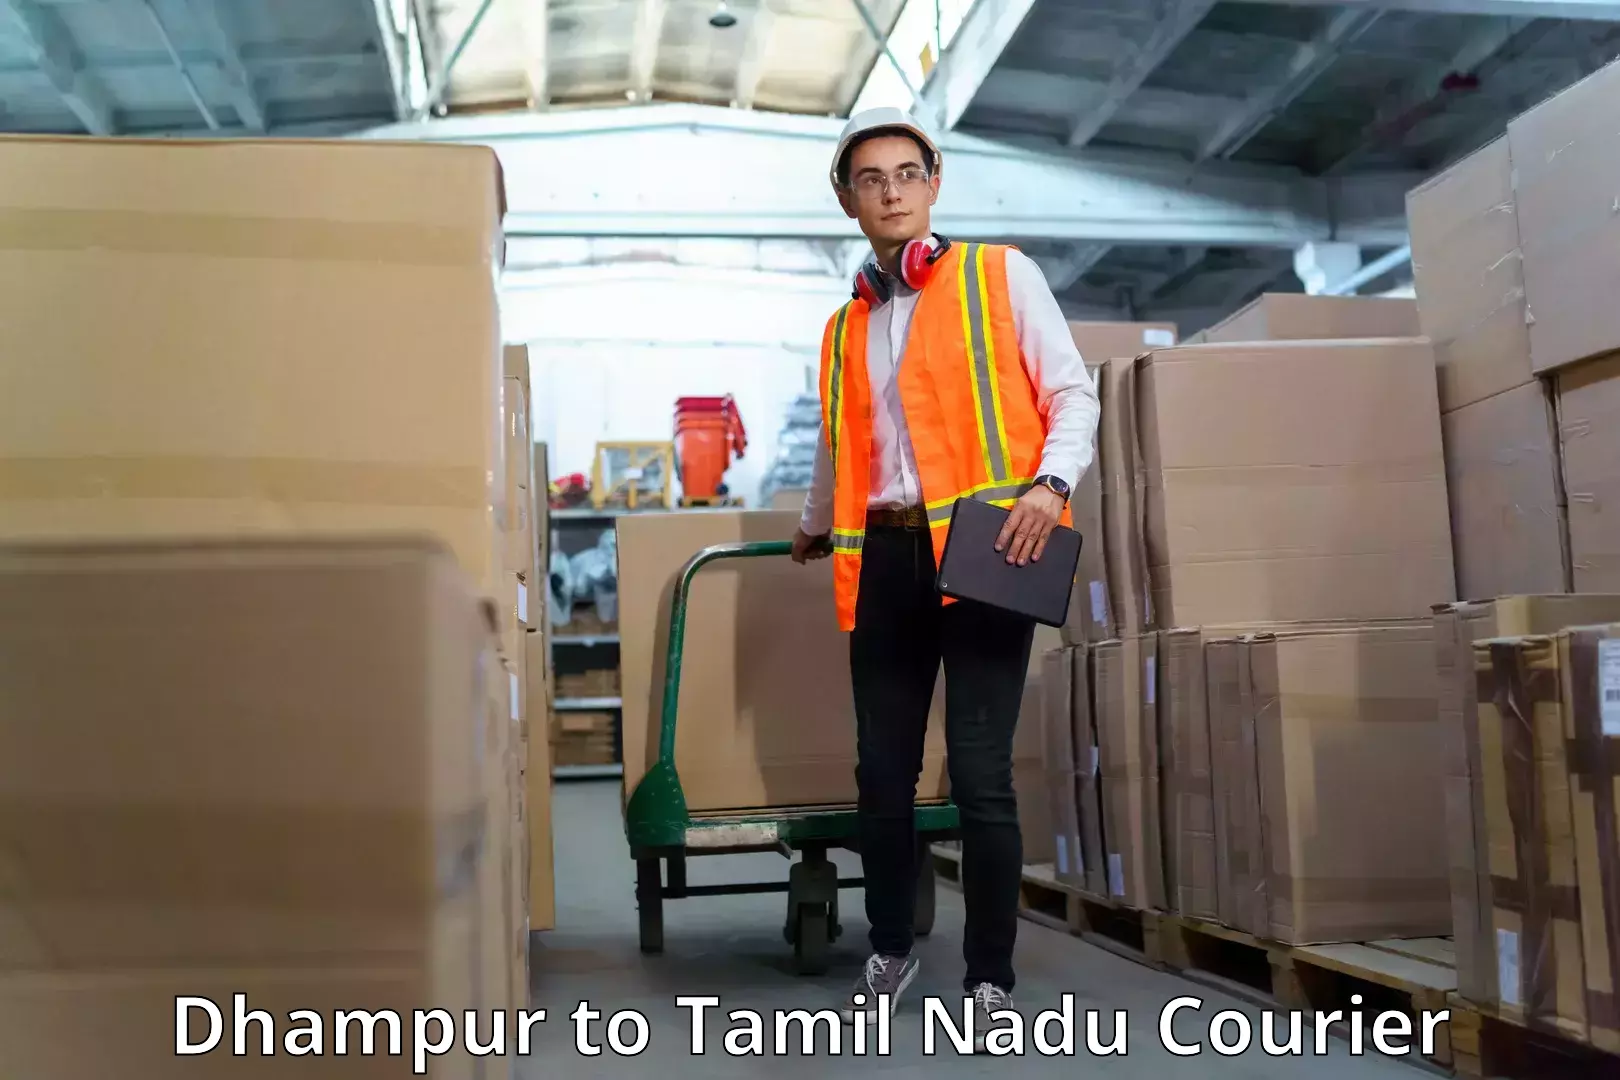 Express delivery network Dhampur to Tamil Nadu